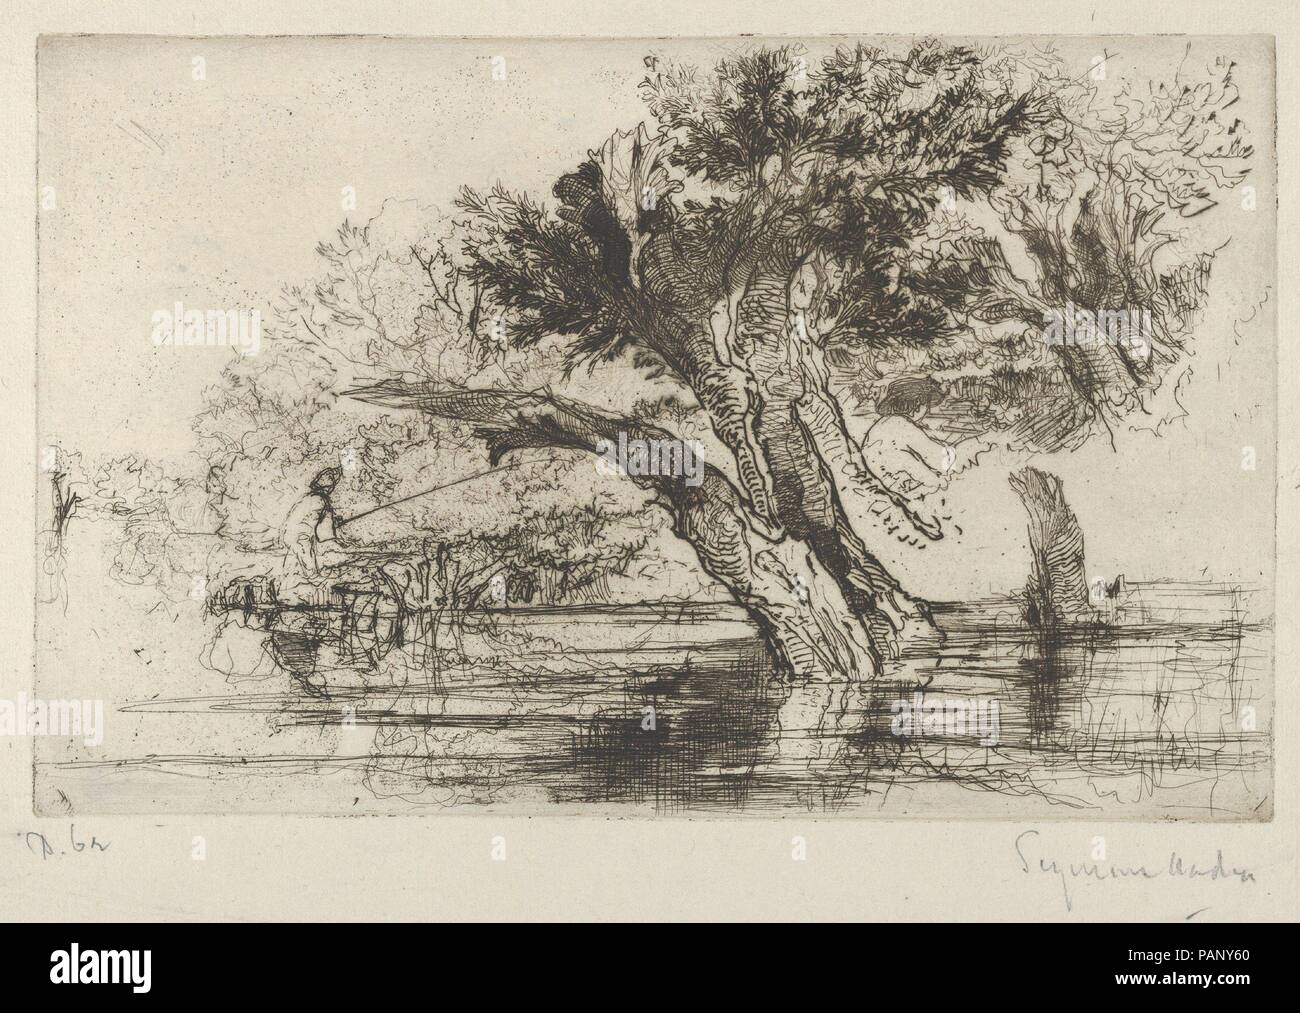 Penton Hook. Artist: Sir Francis Seymour Haden (British, London 1818-1910 Bramdean, Hampshire). Dimensions: Plate: 5 13/16 × 9 1/4 in. (14.8 × 23.5 cm)  Sheet: 7 13/16 × 12 1/8 in. (19.9 × 30.8 cm). Date: 1864.  Seymour Haden was the unlikely combination of a surgeon and an etcher. Although he pursued a very successful medical career, he is mostly remembered for his etched work as well as for his writings on etching. He was one of a group of artists, including James McNeill Whistler (1834-1903) and Alphonse Legros (1837-1911), whose passionate interest in the medium led to the so-called etchin Stock Photo